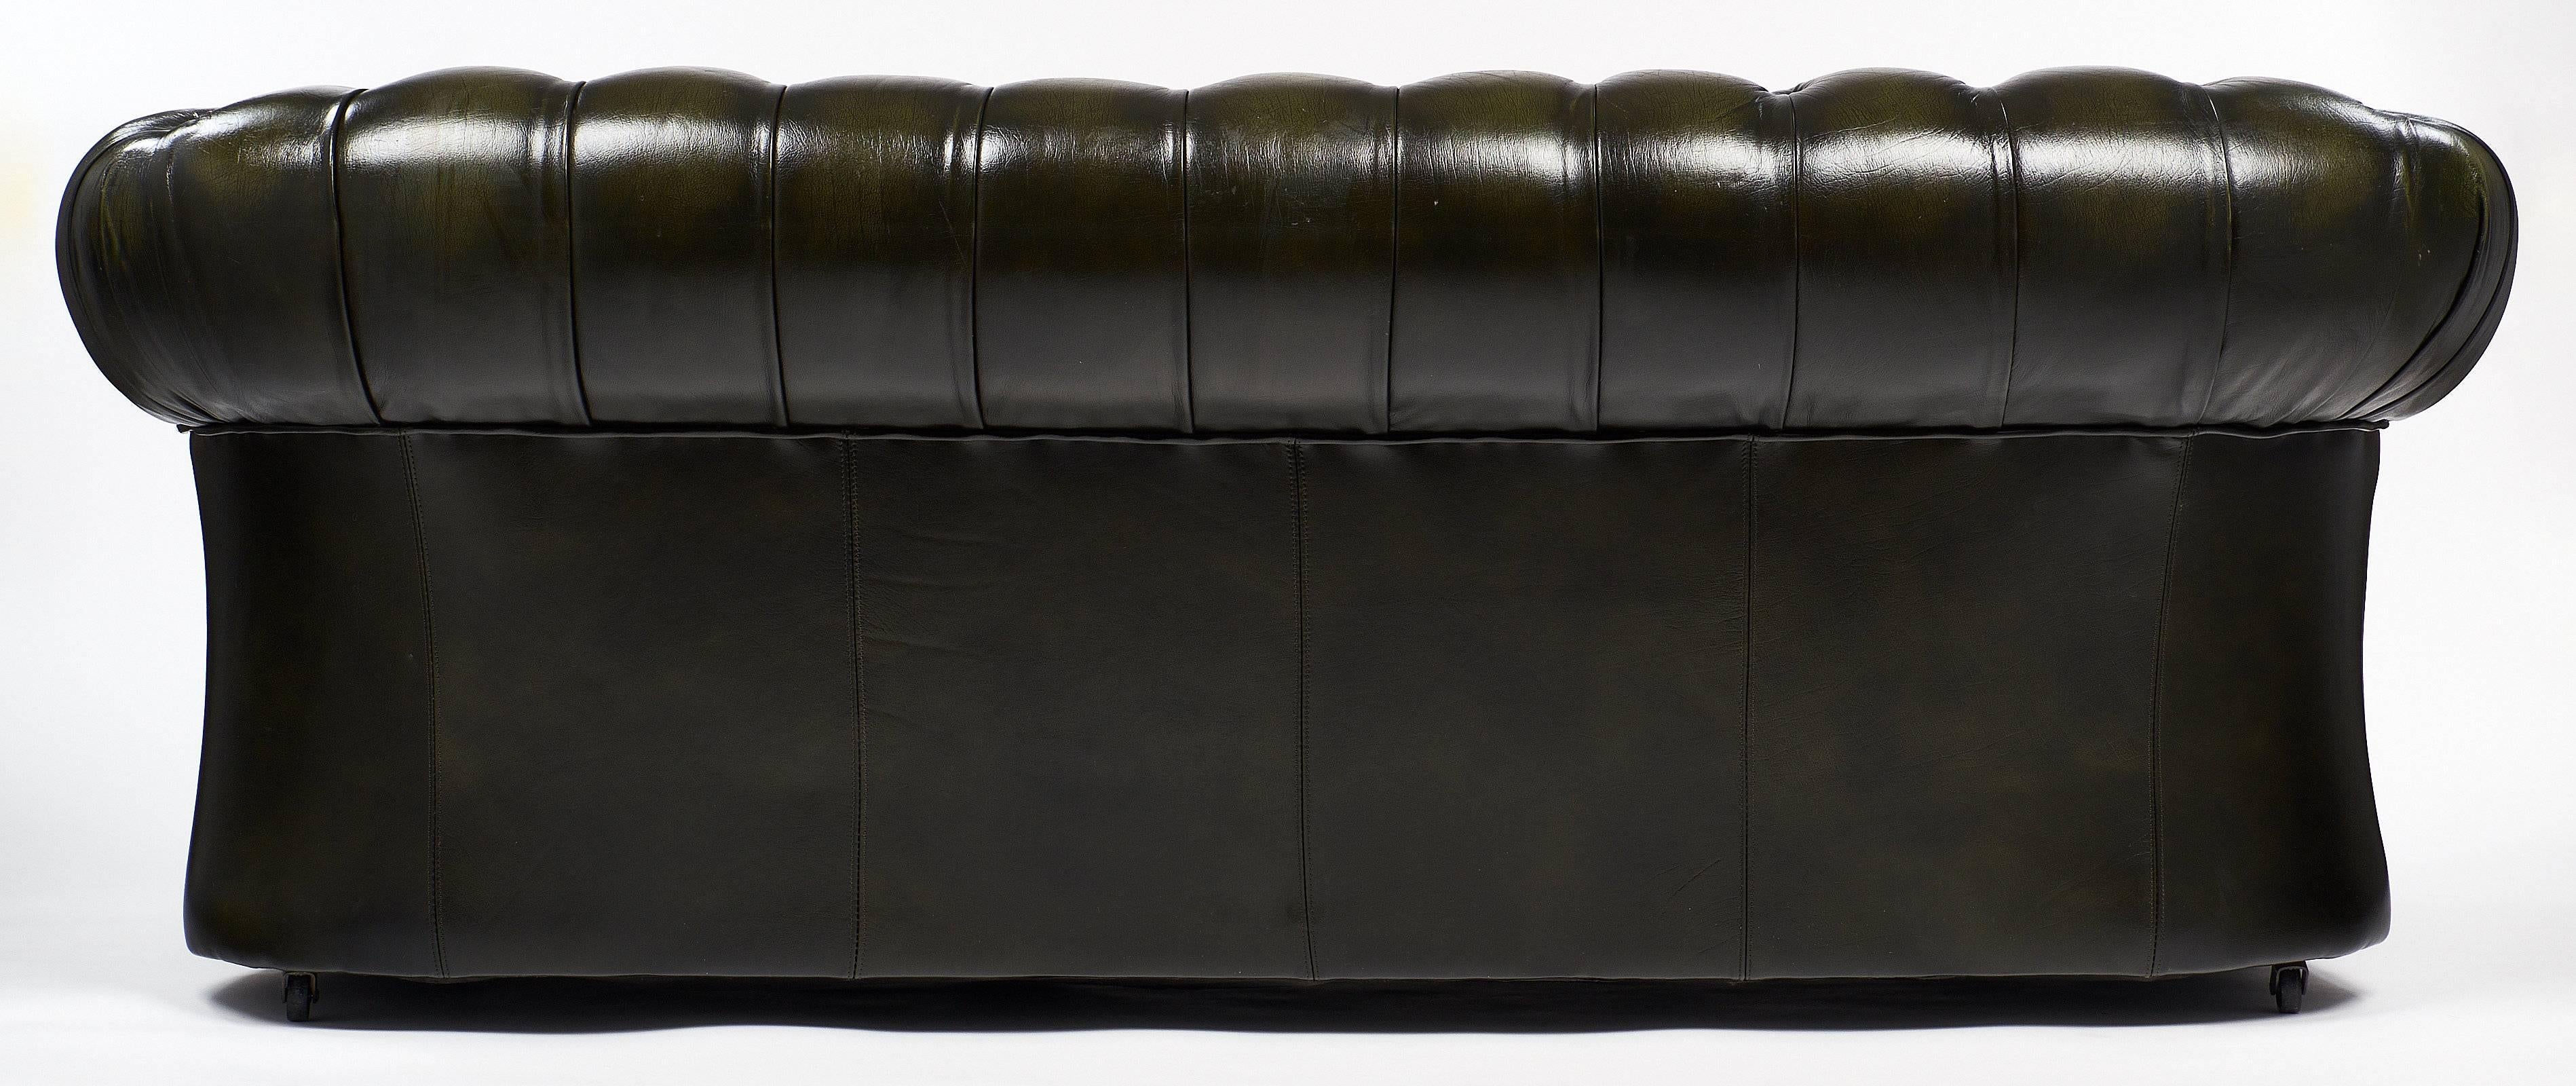 Mid-20th Century Green Leather Vintage Chesterfield Sofa